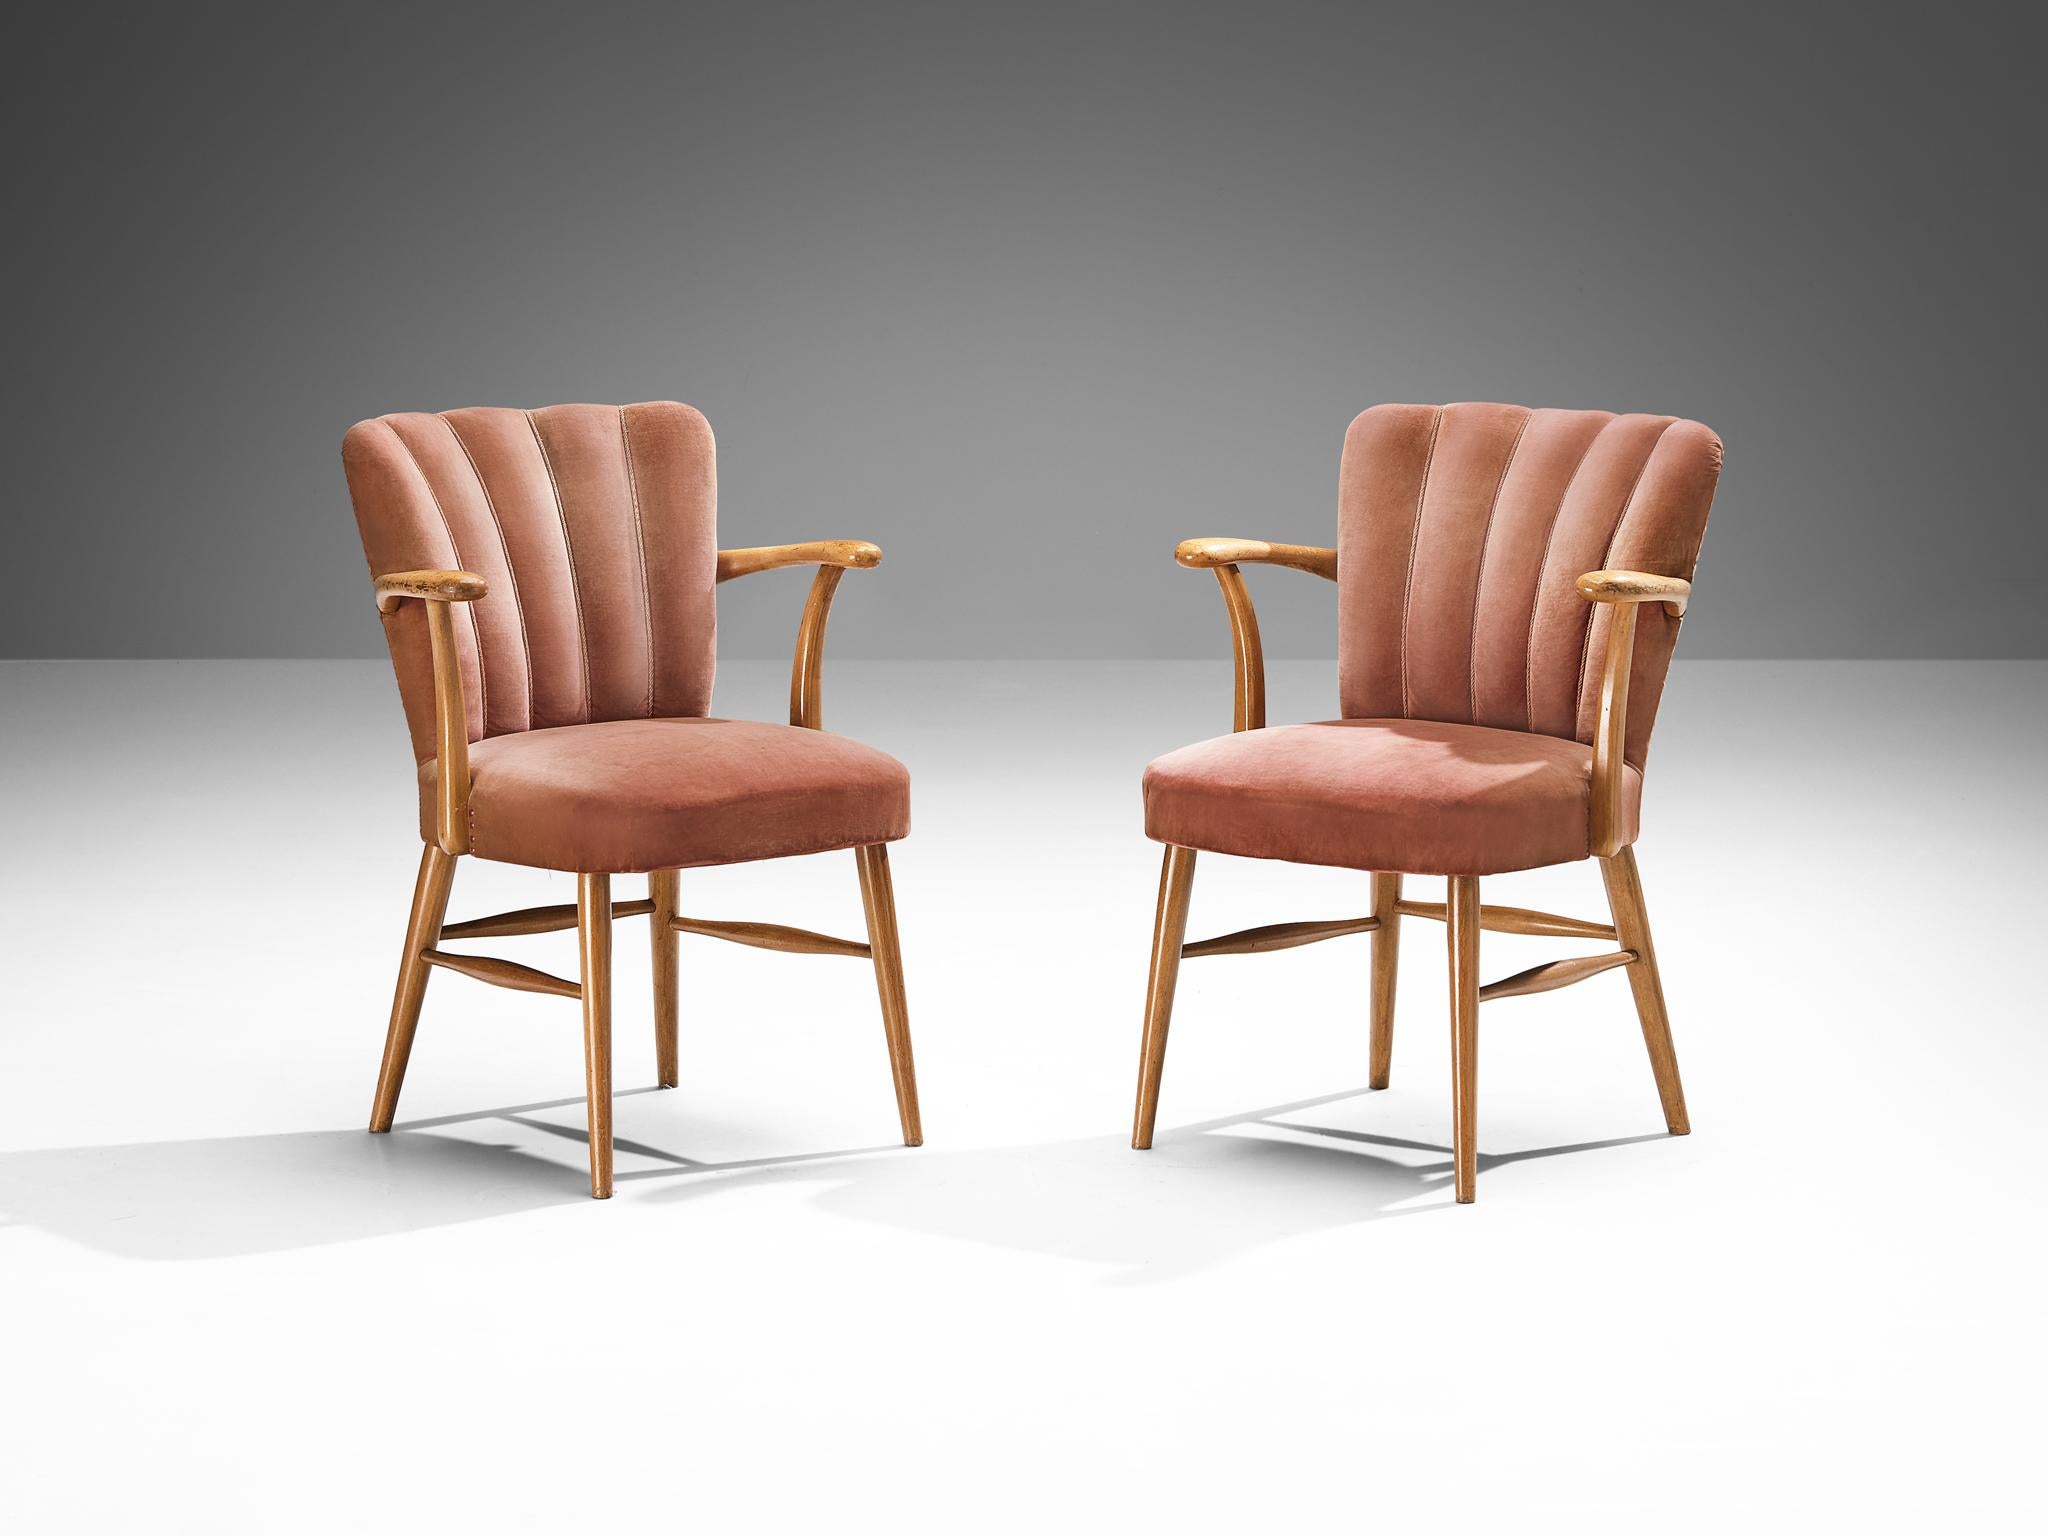 Mid-20th Century European Armchairs in Soft Pink Velvet Upholstery and Wood  For Sale